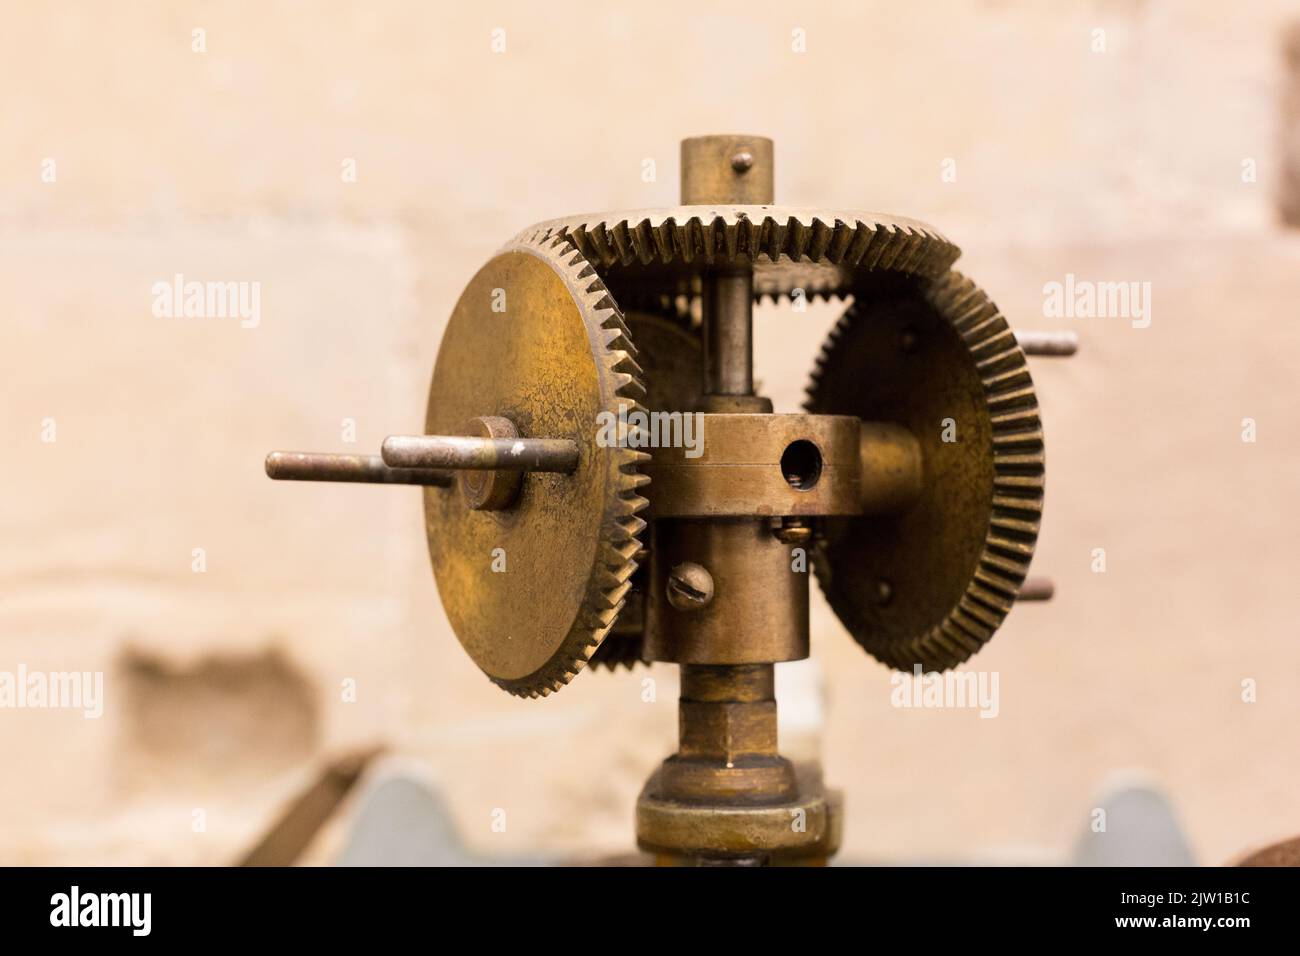 Antique watch machinery in good working order and very well preserved. Stock Photo